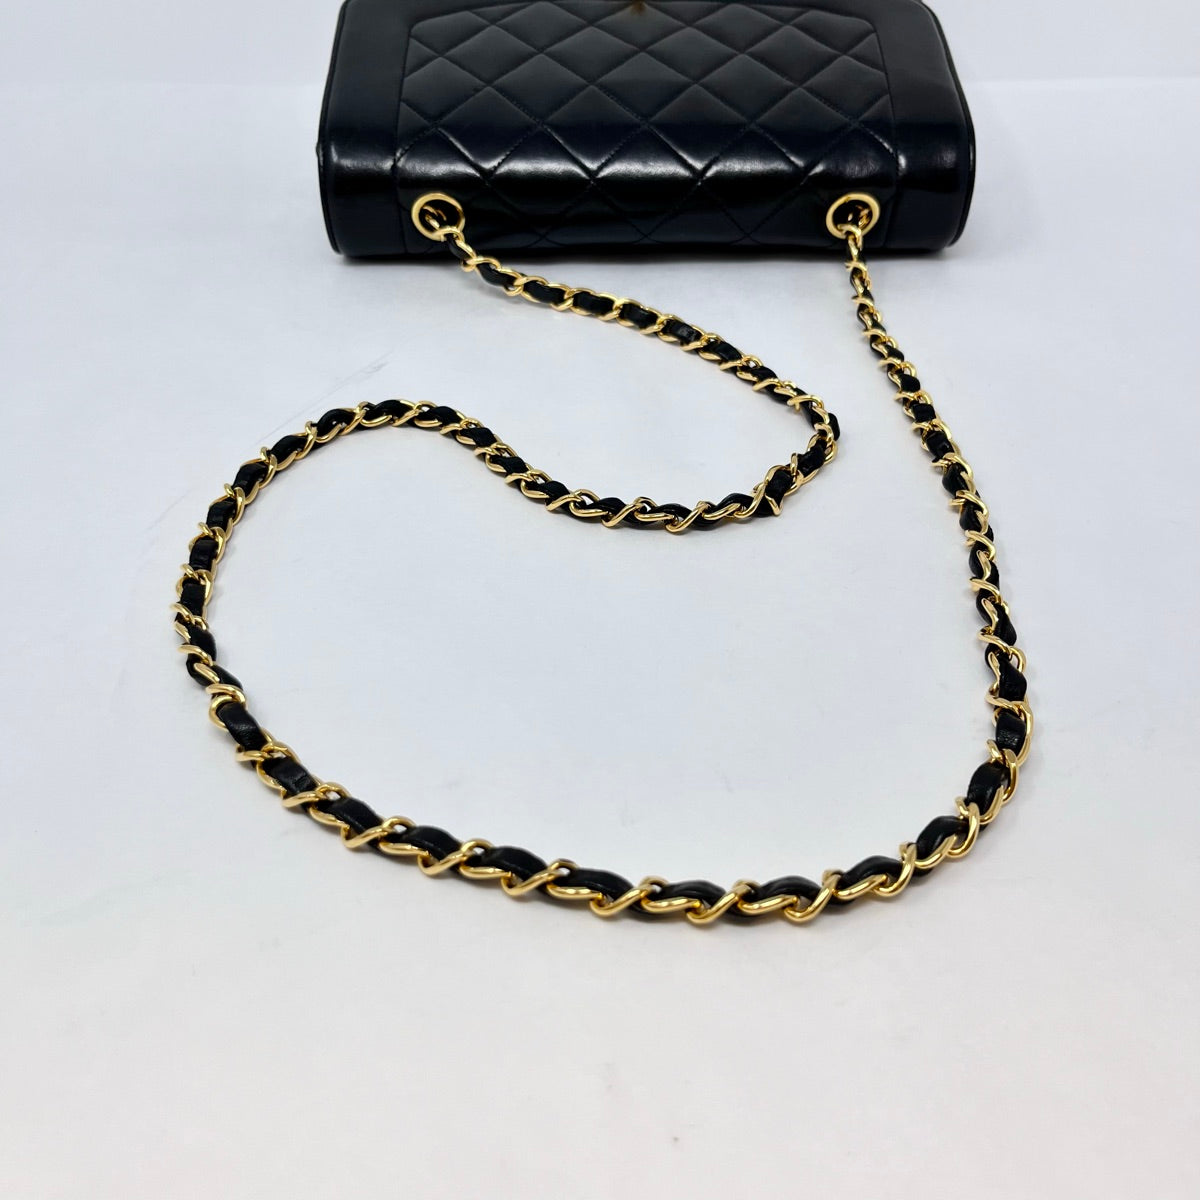 Chanel 1991 -1994 Diana Bag with 24K Gold Plated Hardware